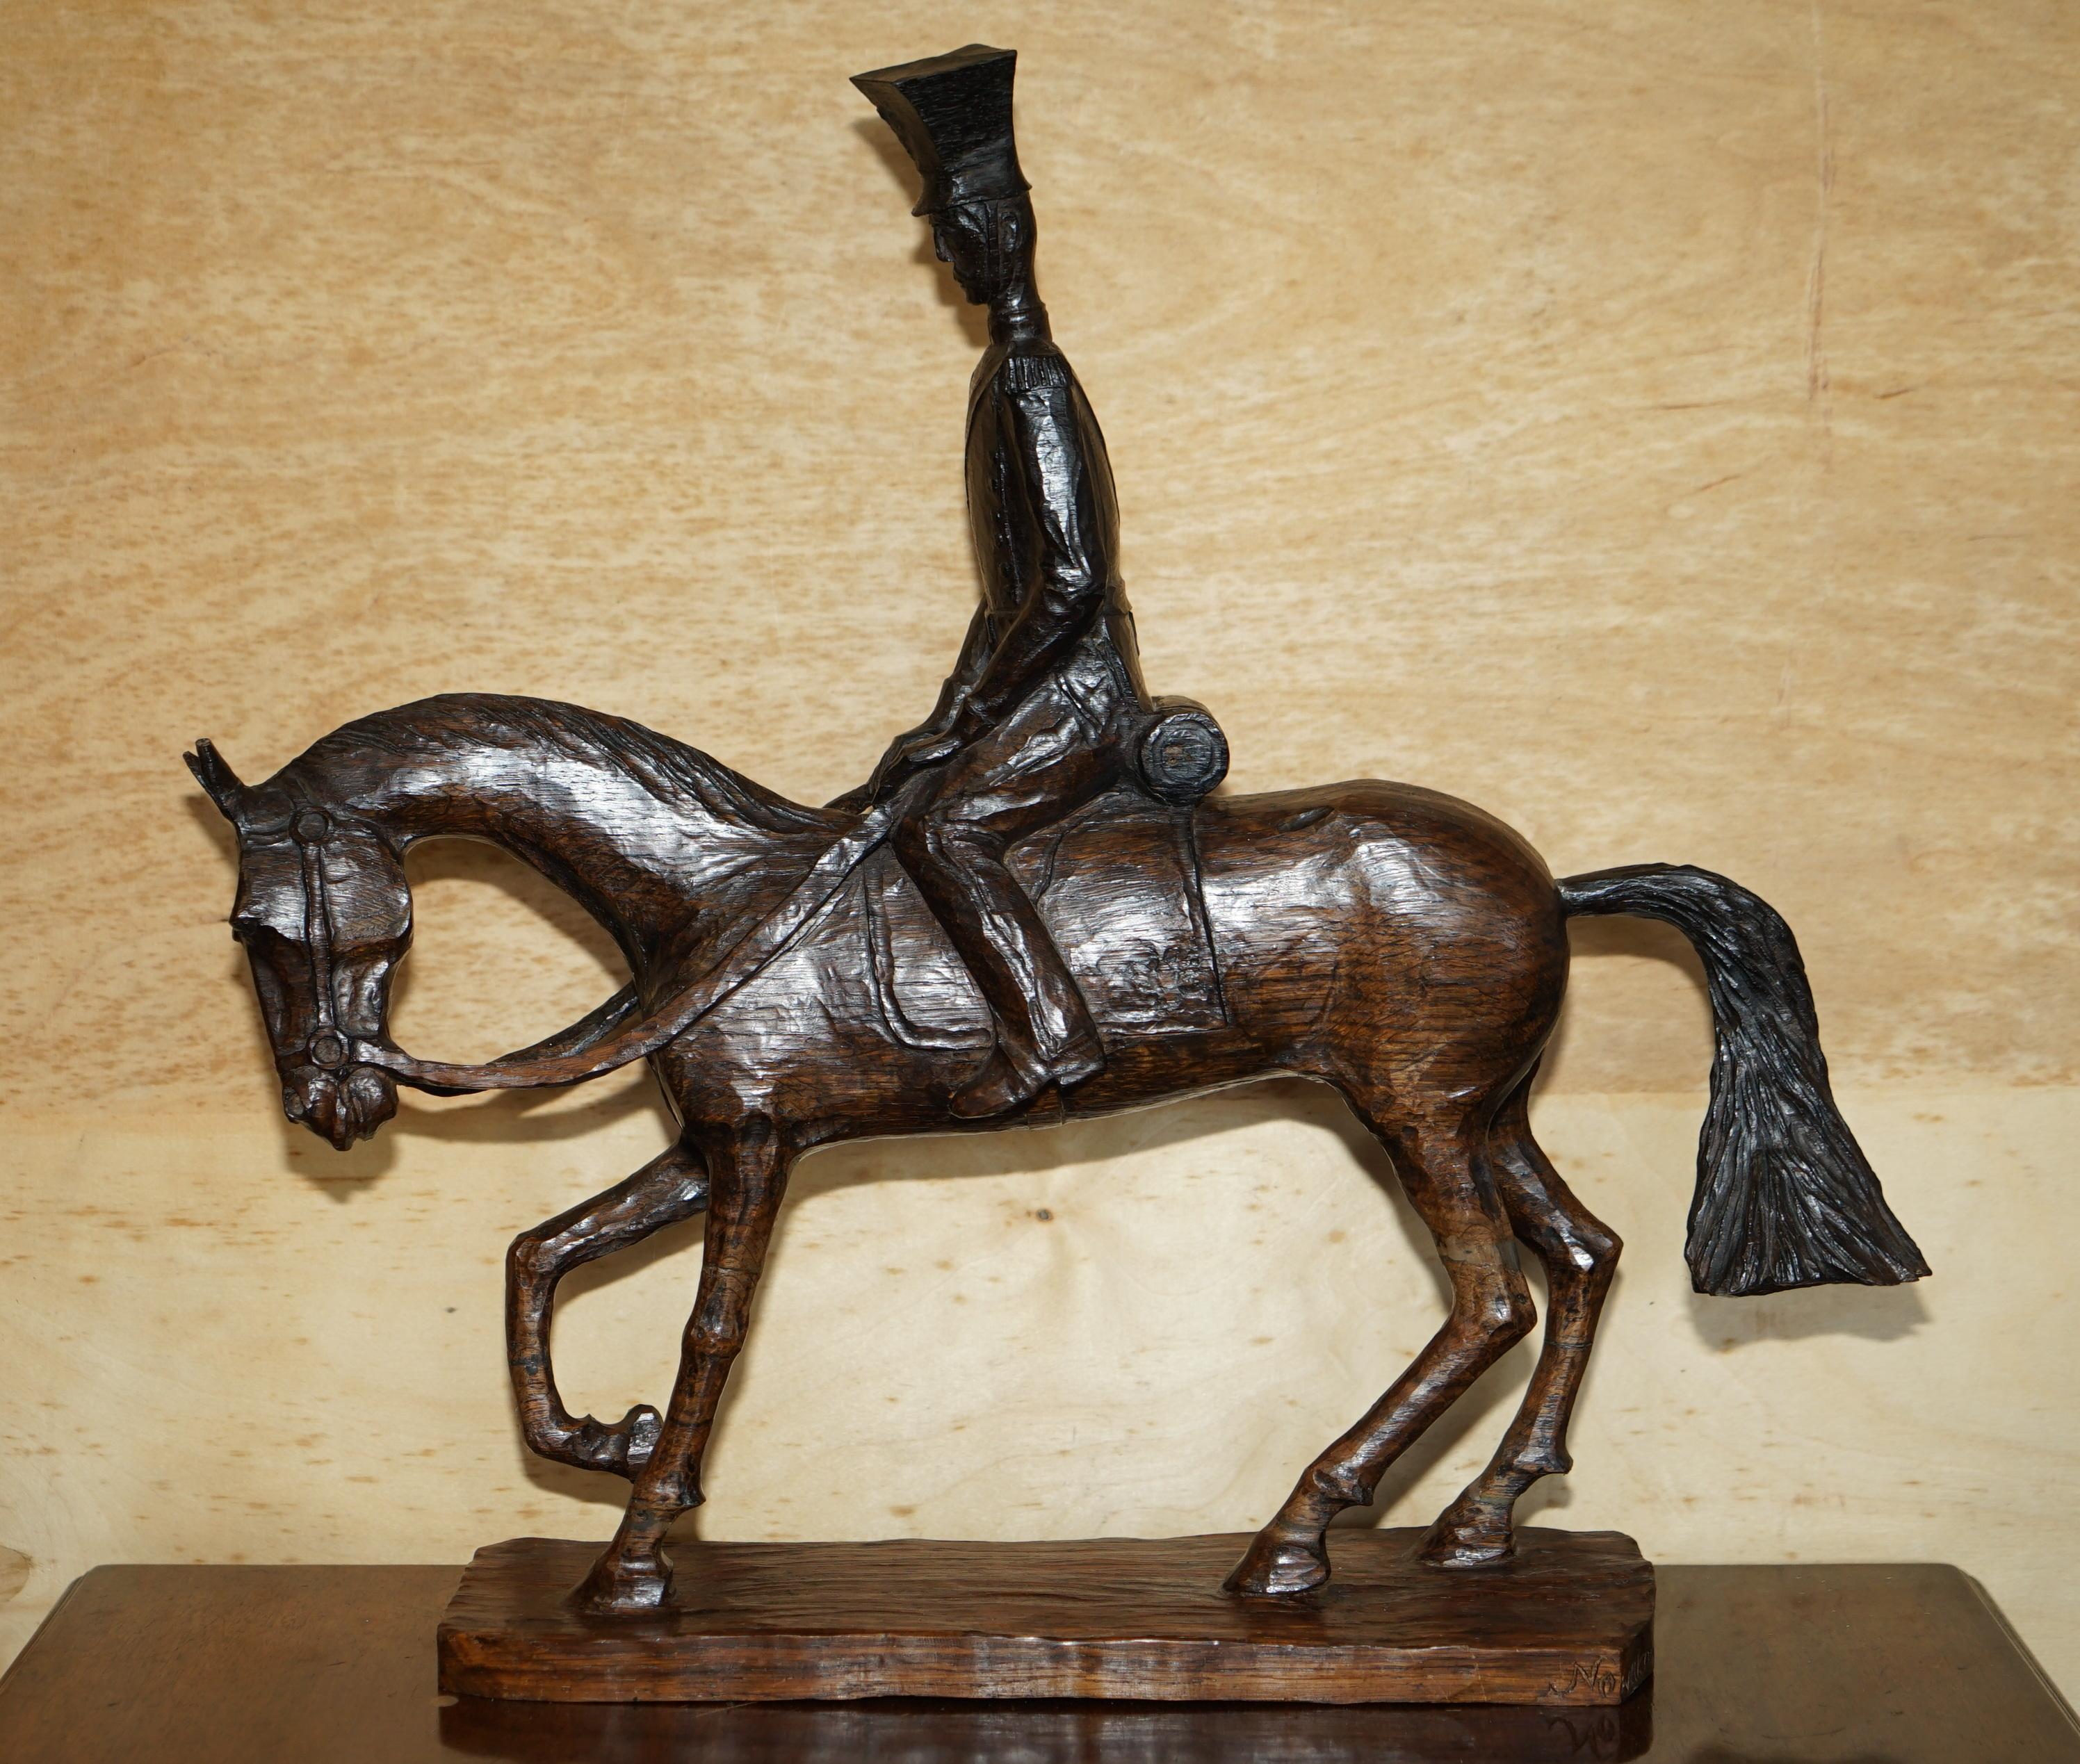 HAND CARVED SIGNED WAKMASKI 80 LARGE WOOD STATUE OF SOLDIER ON A HORSE VERY FiNE For Sale 5